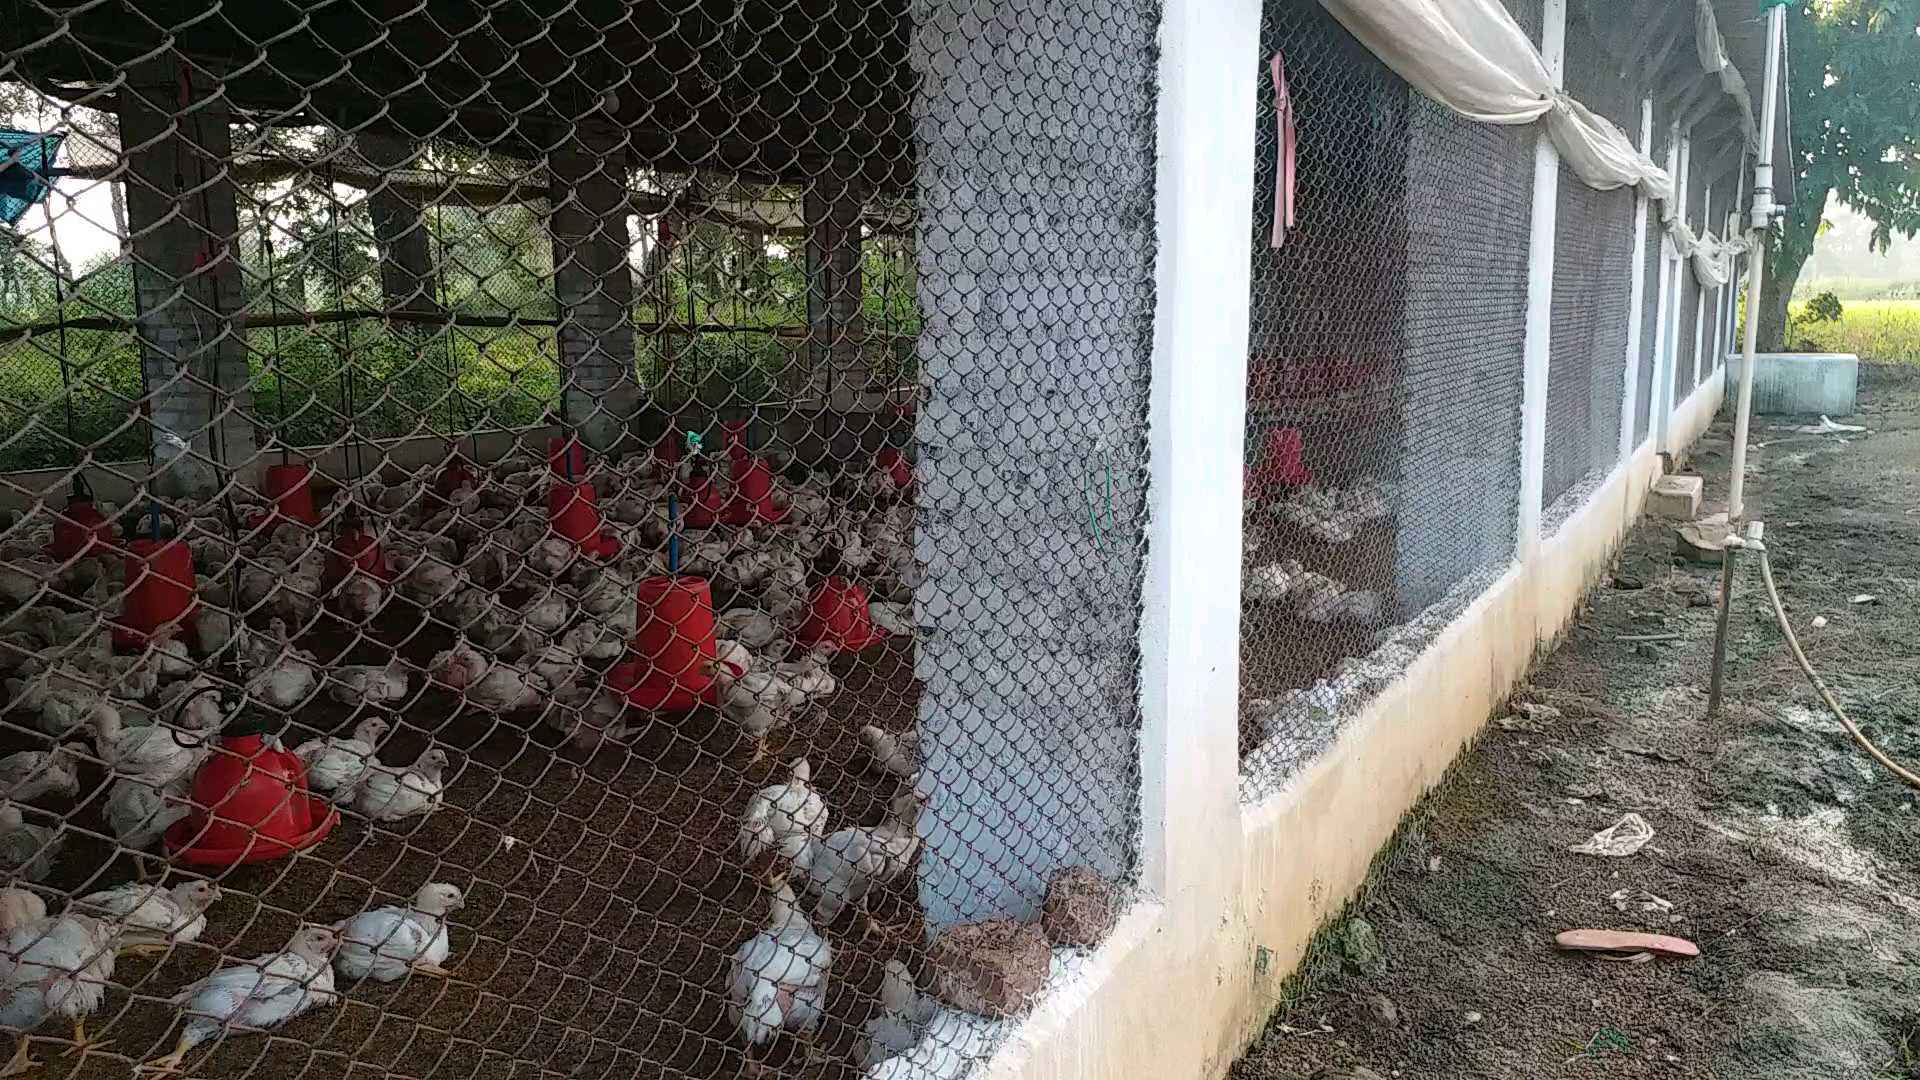 poultry business stalled in lockdown in balod